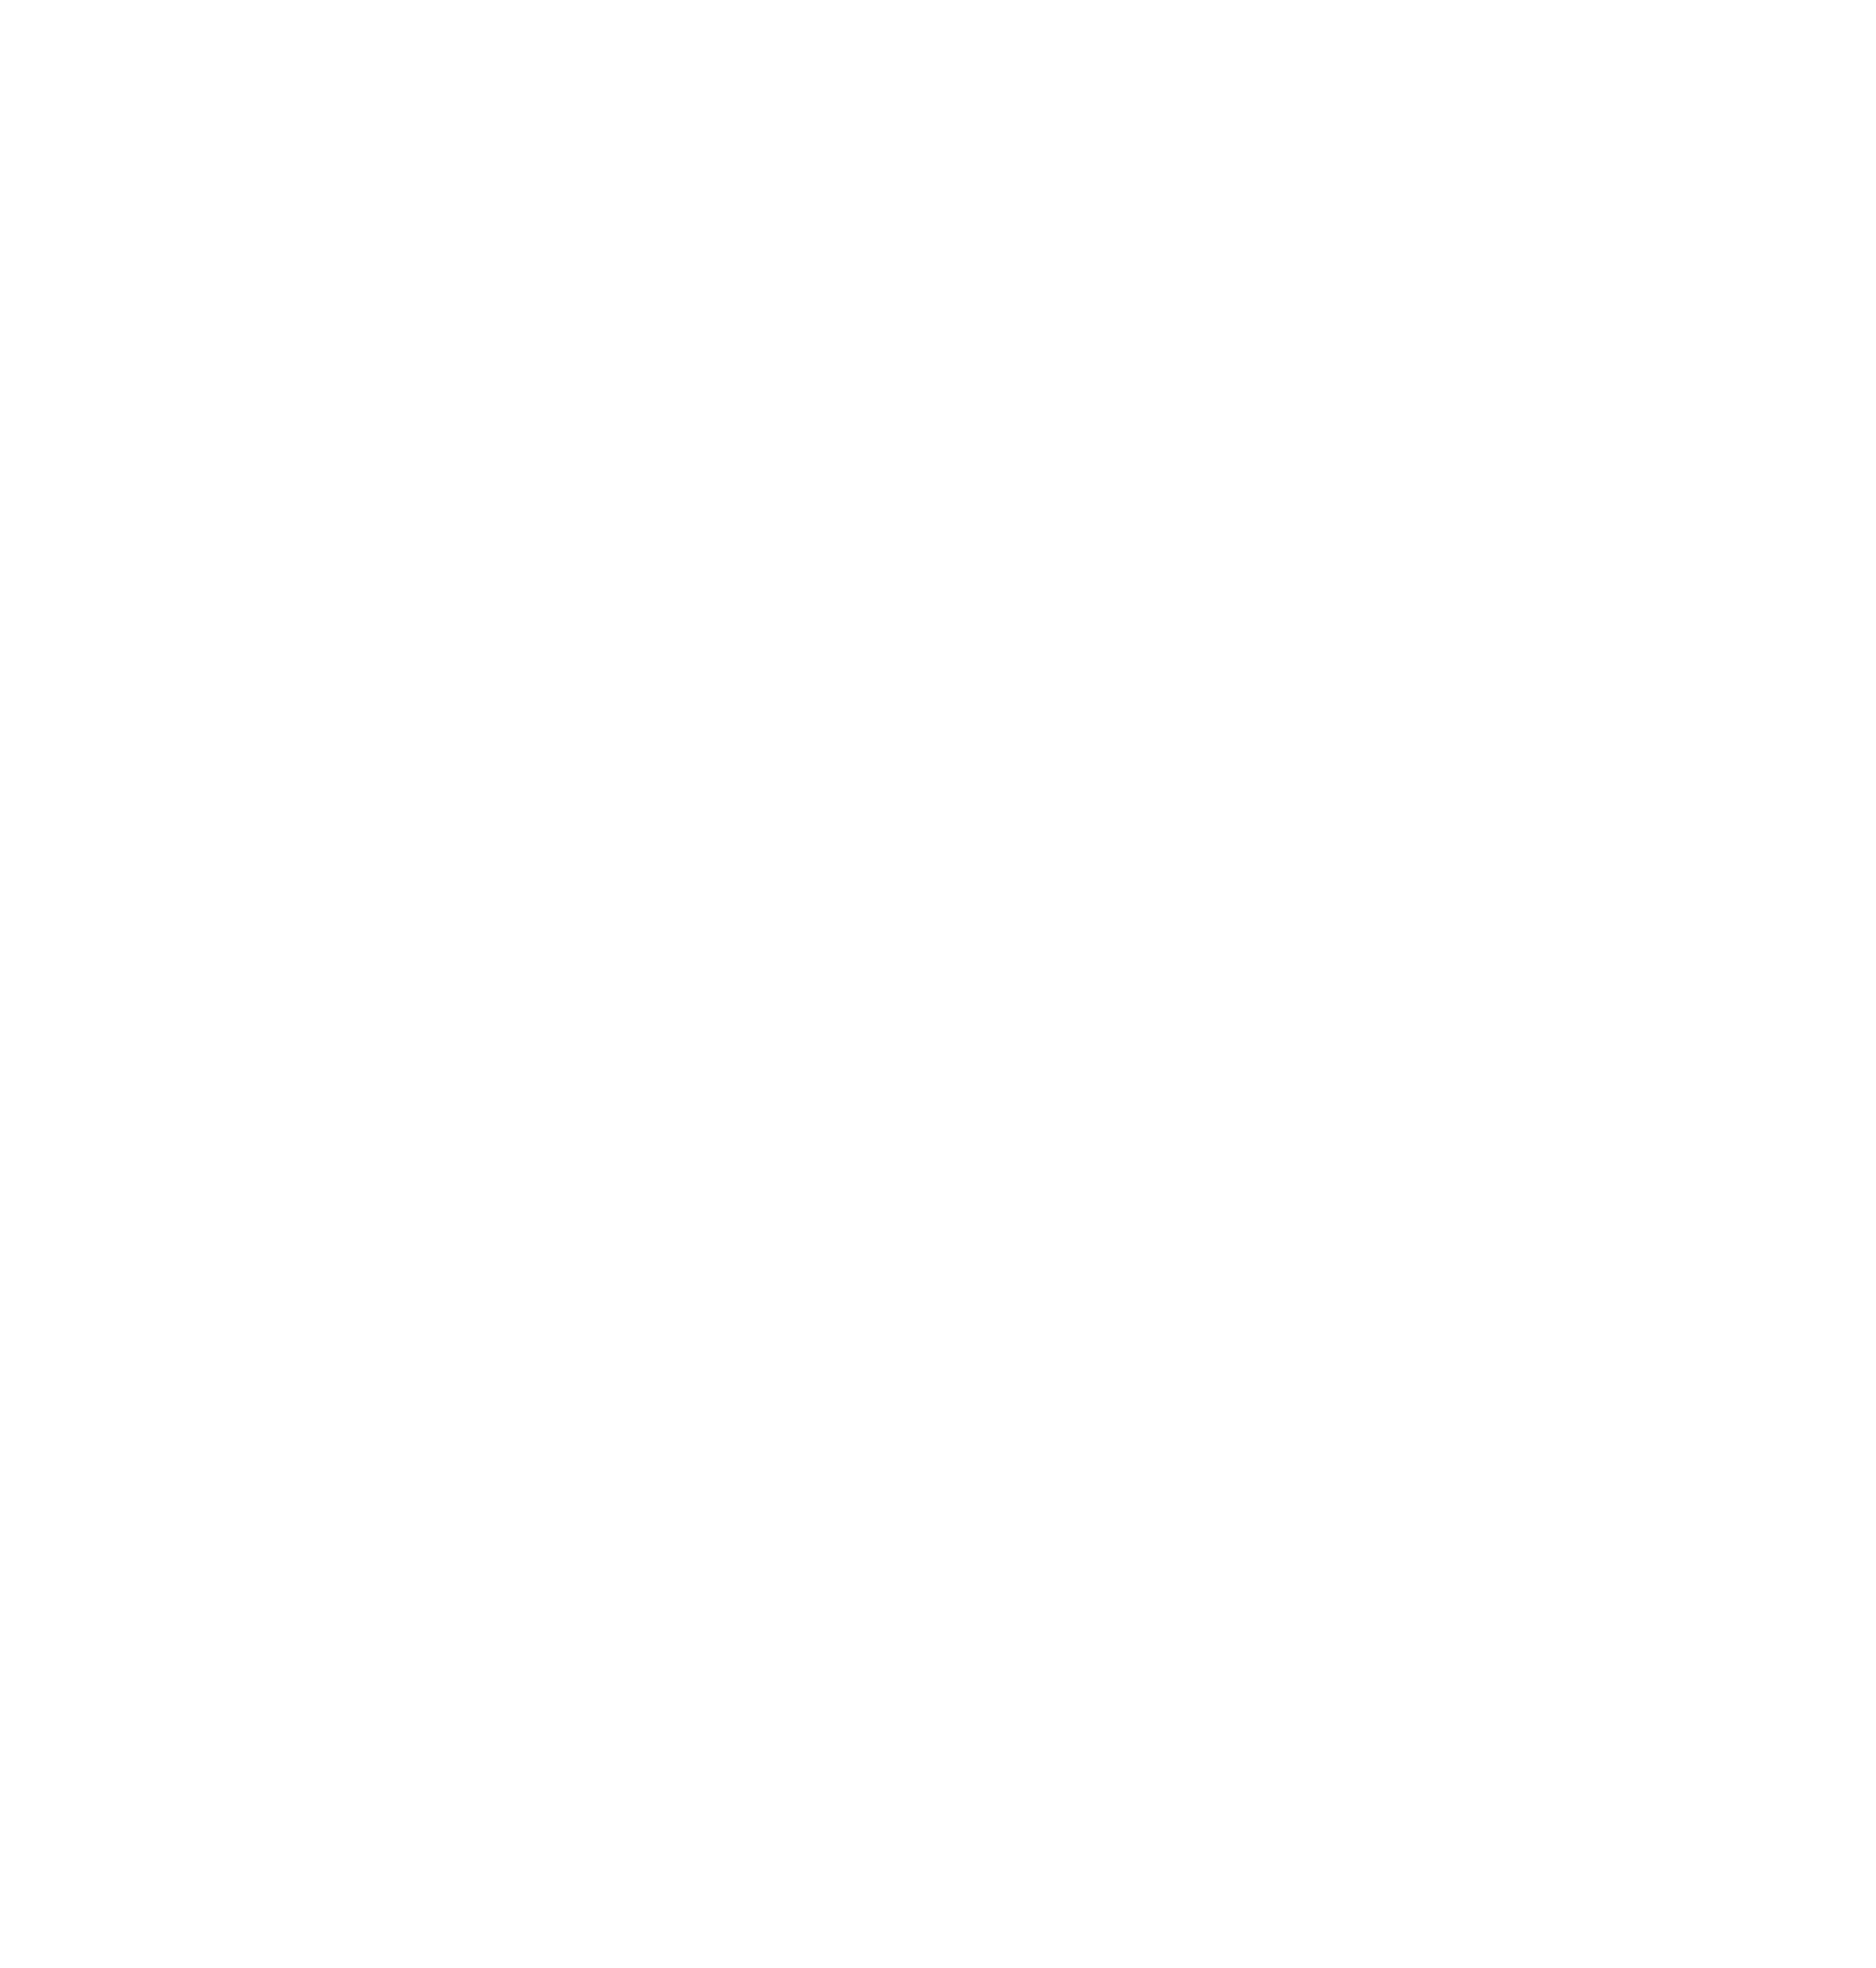 WW Youth Logo Full Tall White.png